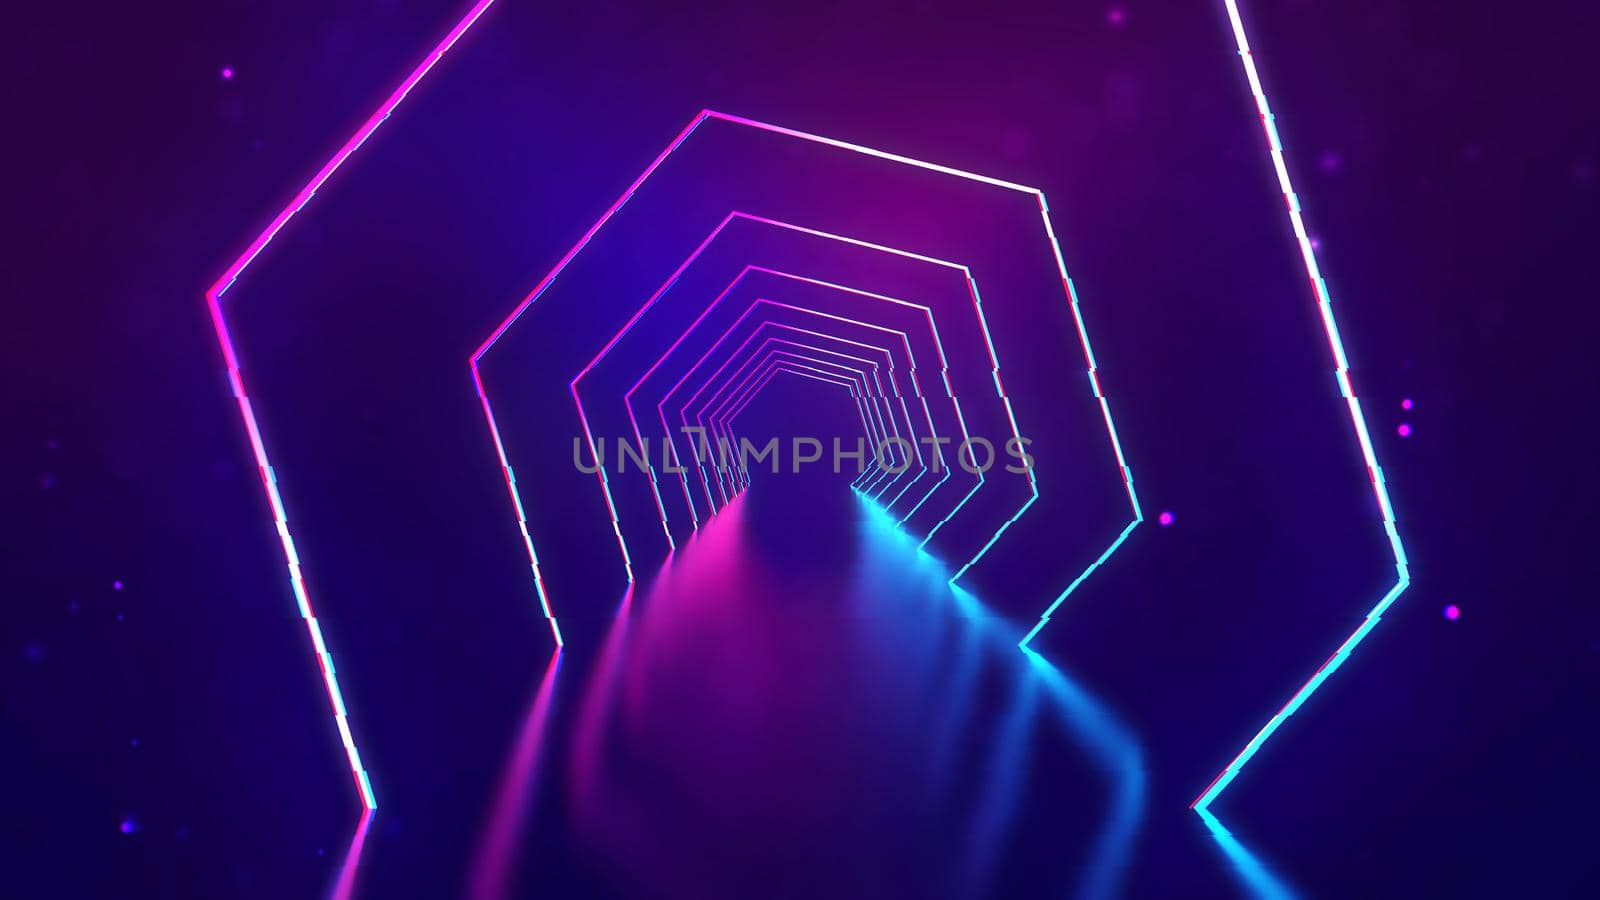 Room with neon lights. Ultraviolet abstract background with neon corridor. 3d technology background. Color illuminated interior with led rays and lasers futuristic.